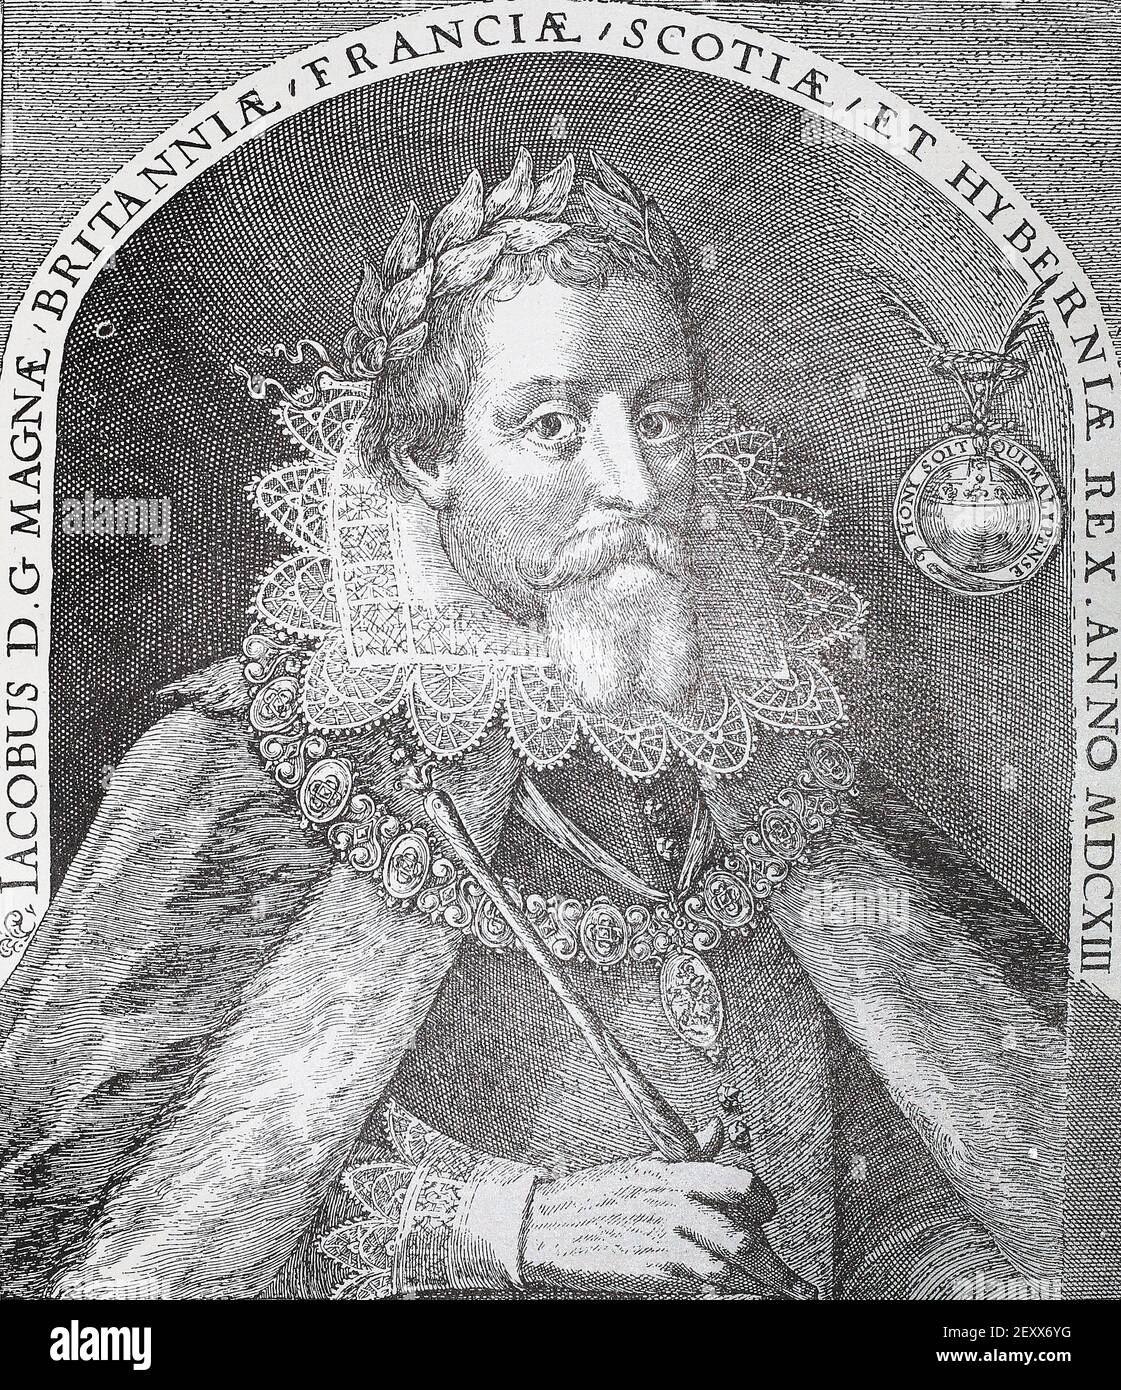 English King James I. Medieval engraving. James I, (1566 - 1625), king of Scotland (as James VI) from 1567 to 1625 and first Stuart king of England from 1603 to 1625, who styled himself “king of Great Britain.” James was a strong advocate of royal absolutism, and his conflicts with an increasingly self-assertive Parliament set the stage for the rebellion against his successor, Charles I. Stock Photo